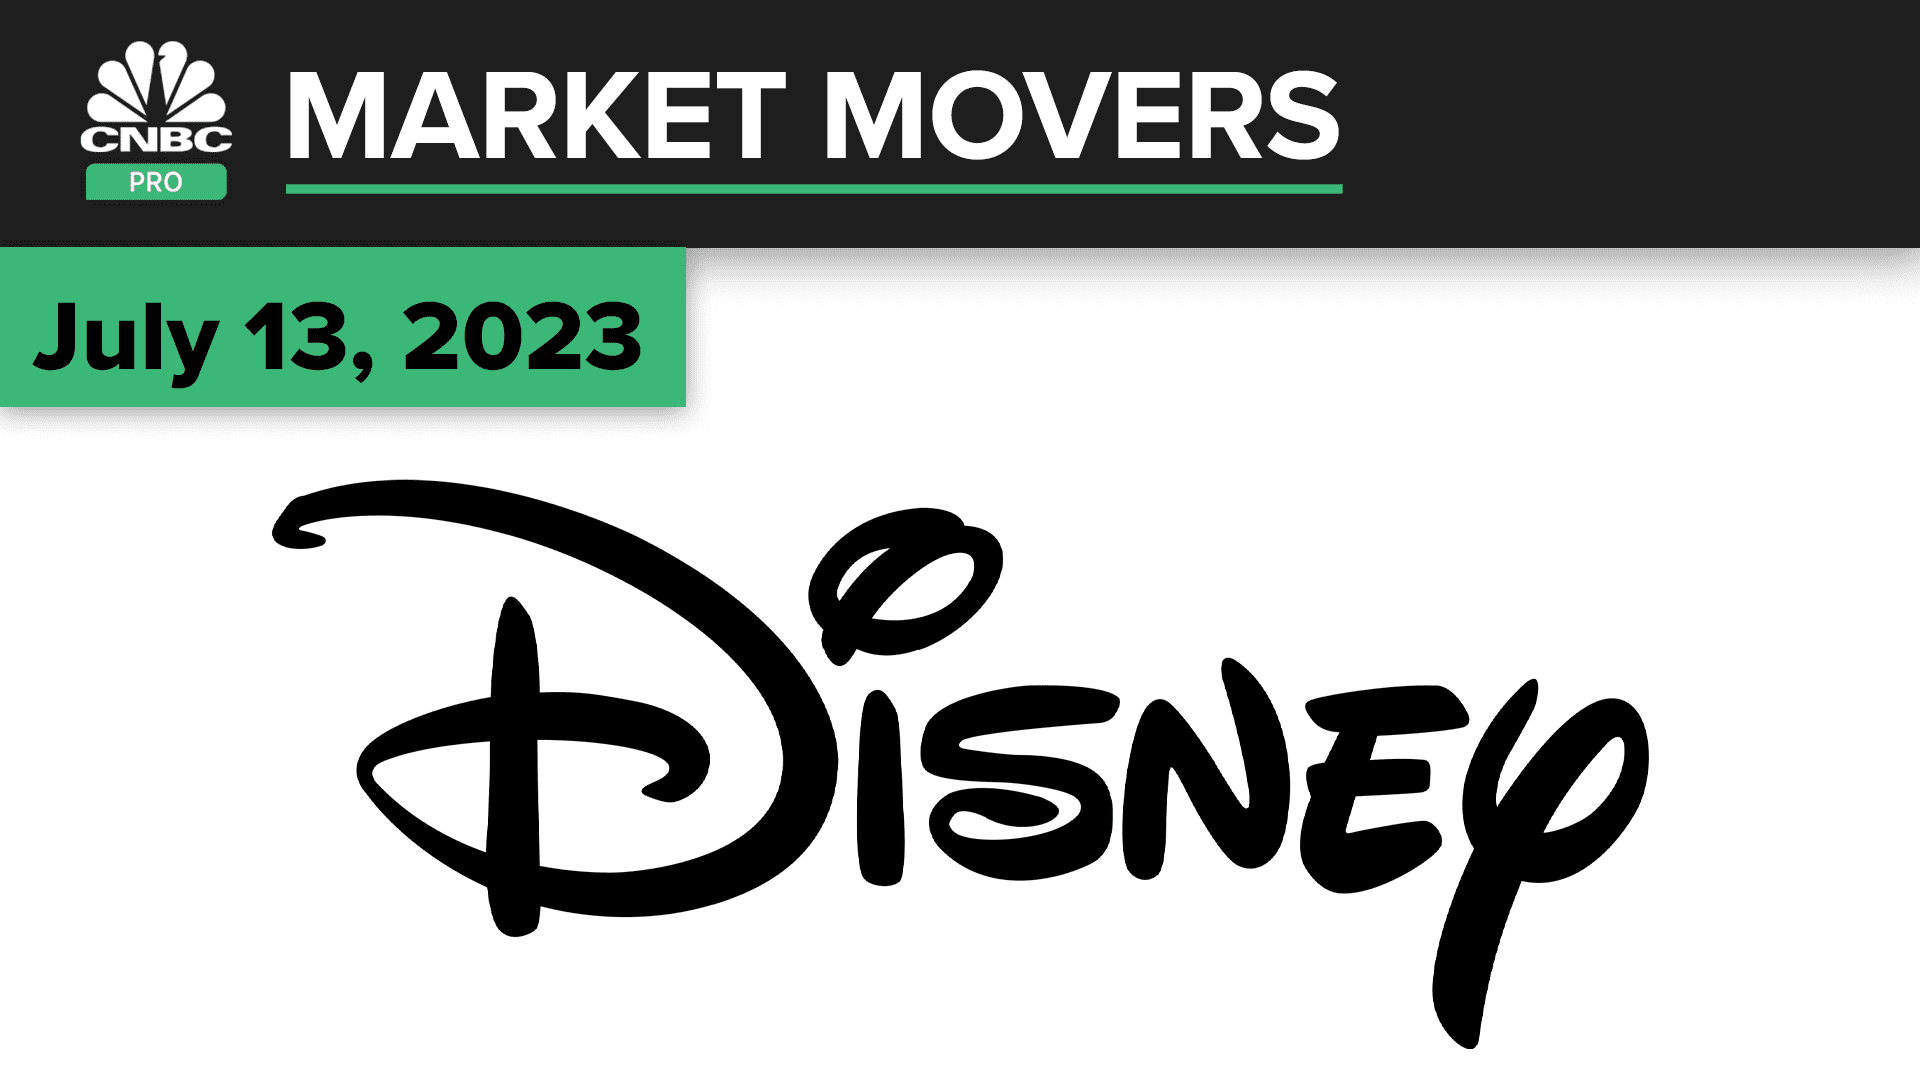 Disney little changed after Iger contract extension. Here's what the pros are saying